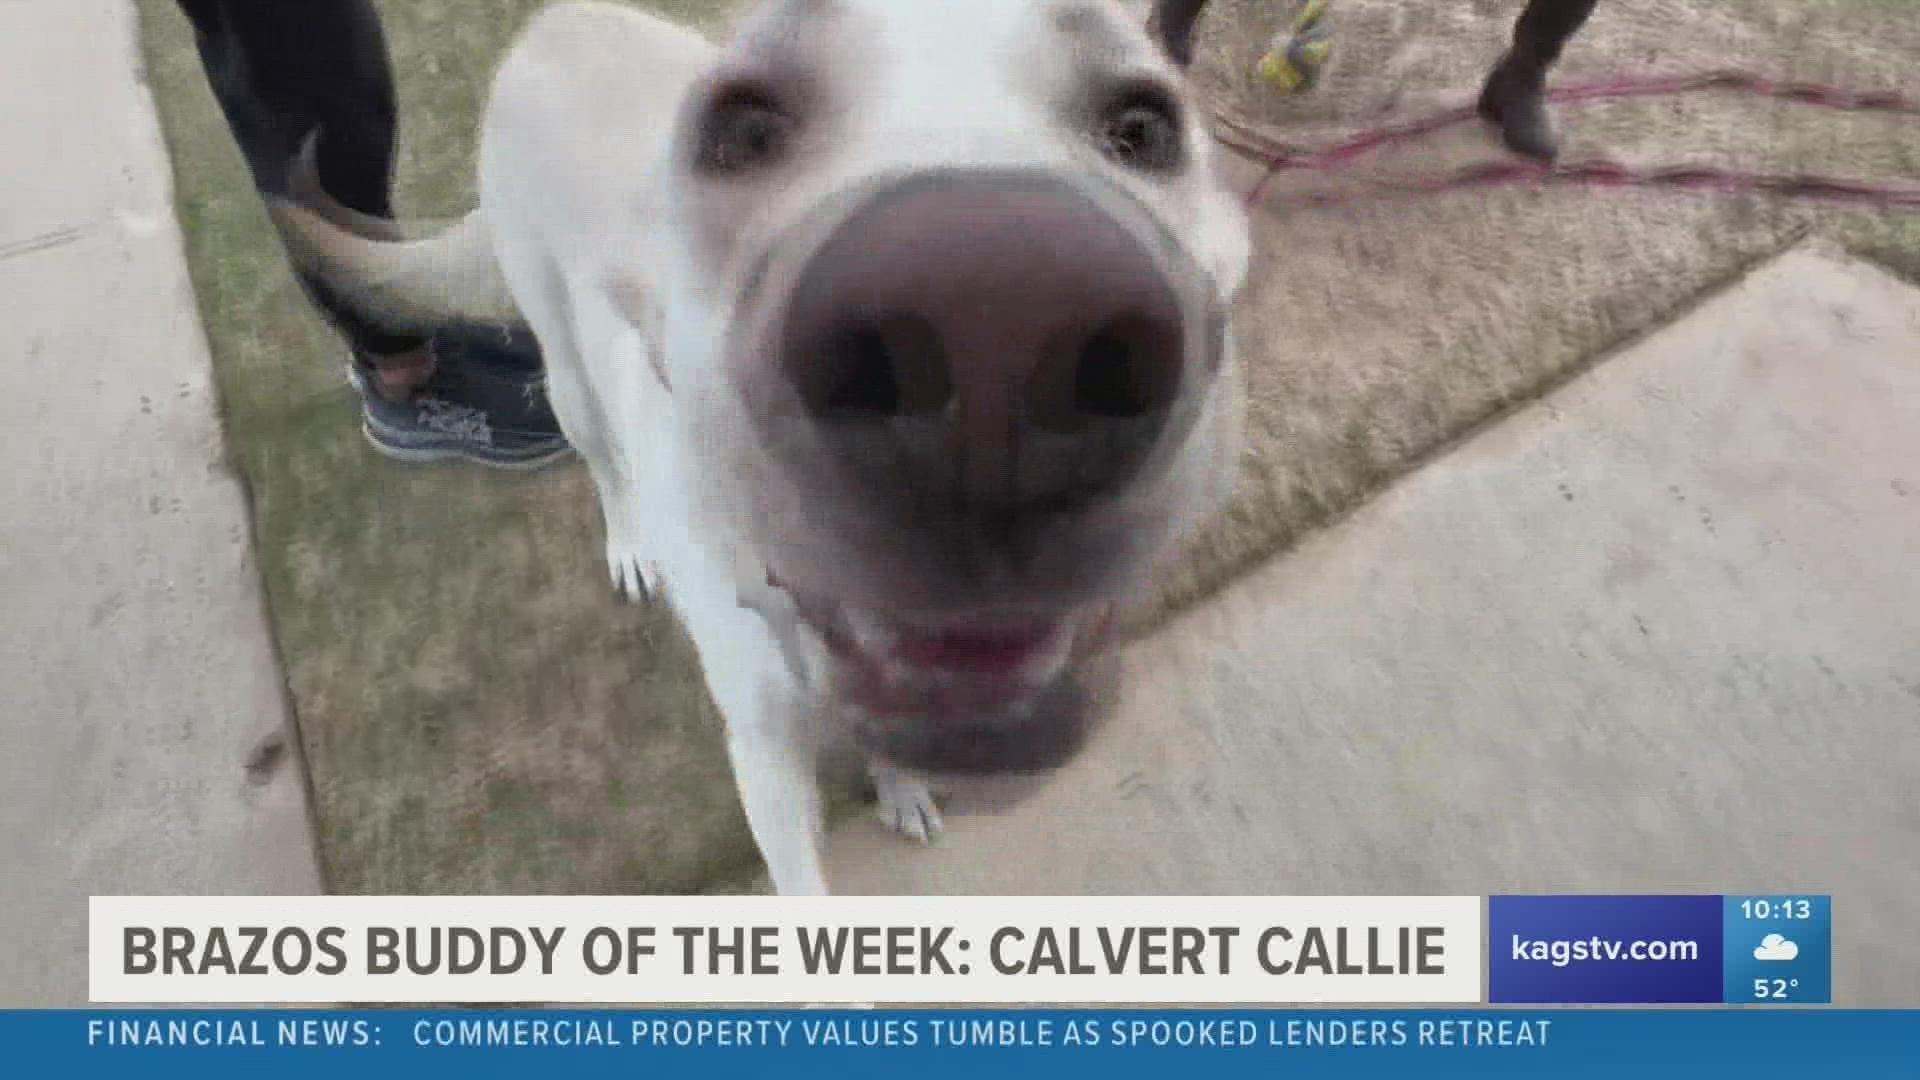 This week's featured Brazos Buddy is Calvert Callie, a two-year-old lab mix that's looking to be adopted.